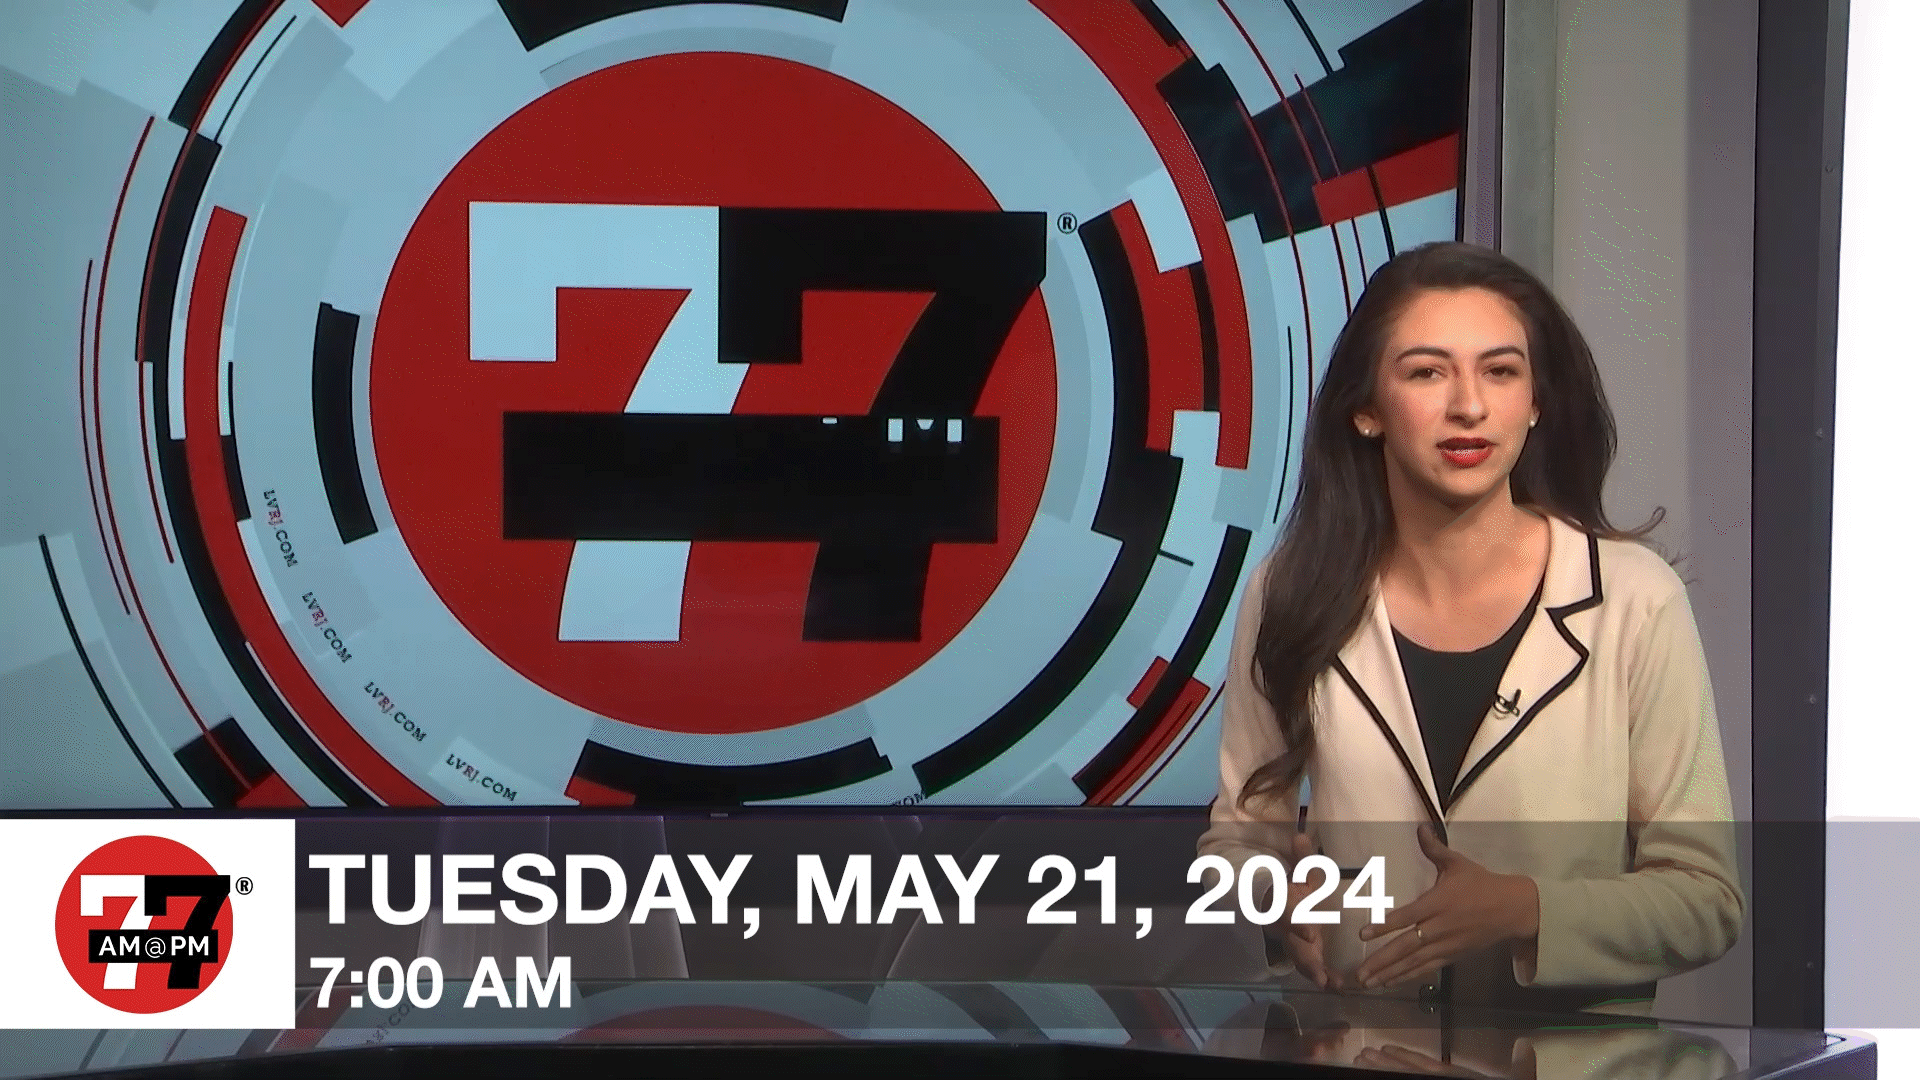 7@7 AM for Tuesday, May 21, 2024